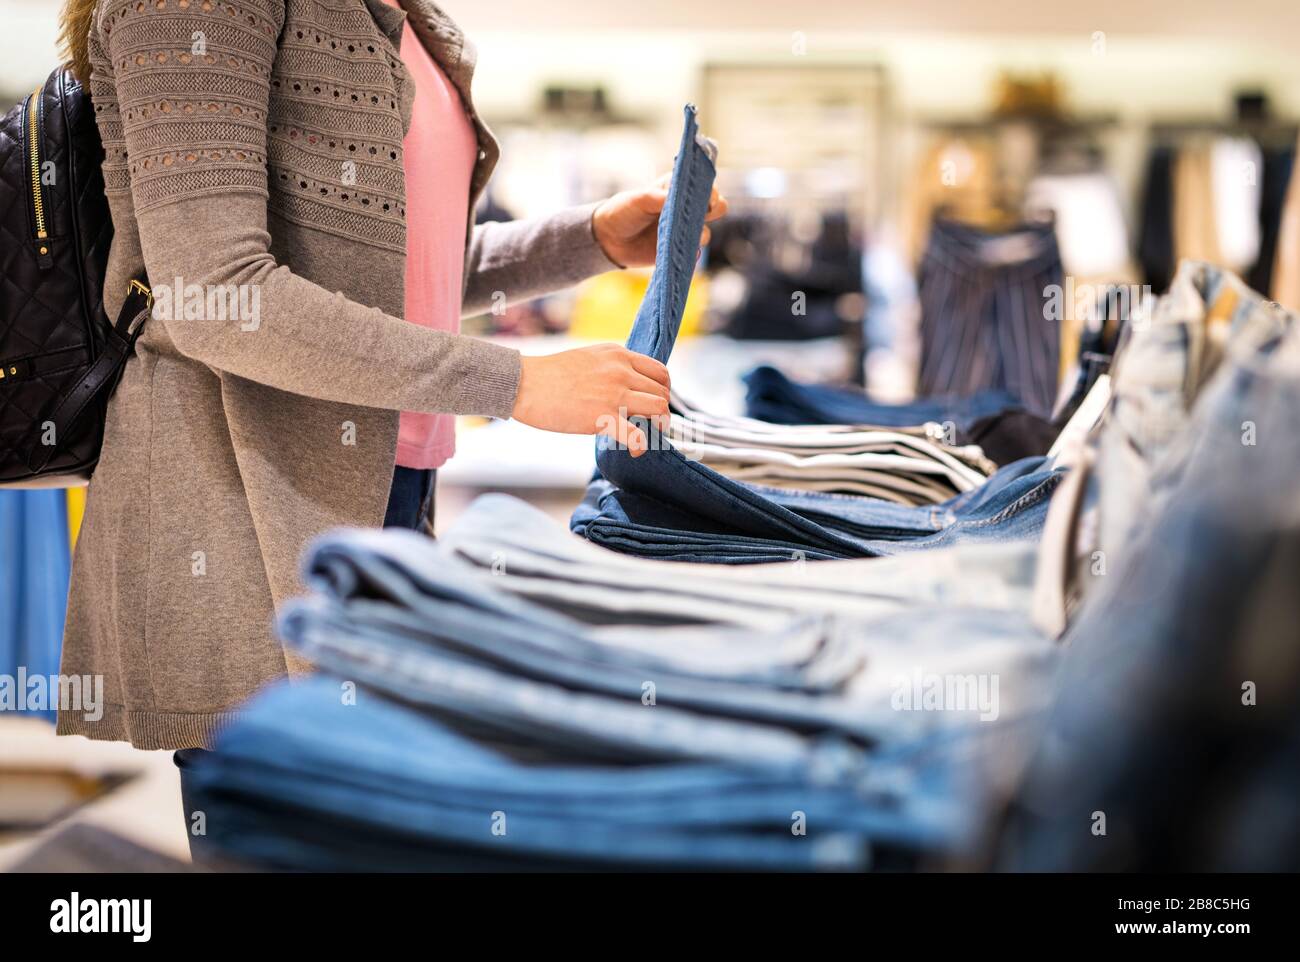 Woman shopping for jeans in fashion store. Female customer holding pants and looking at fabric and material. Stock Photo